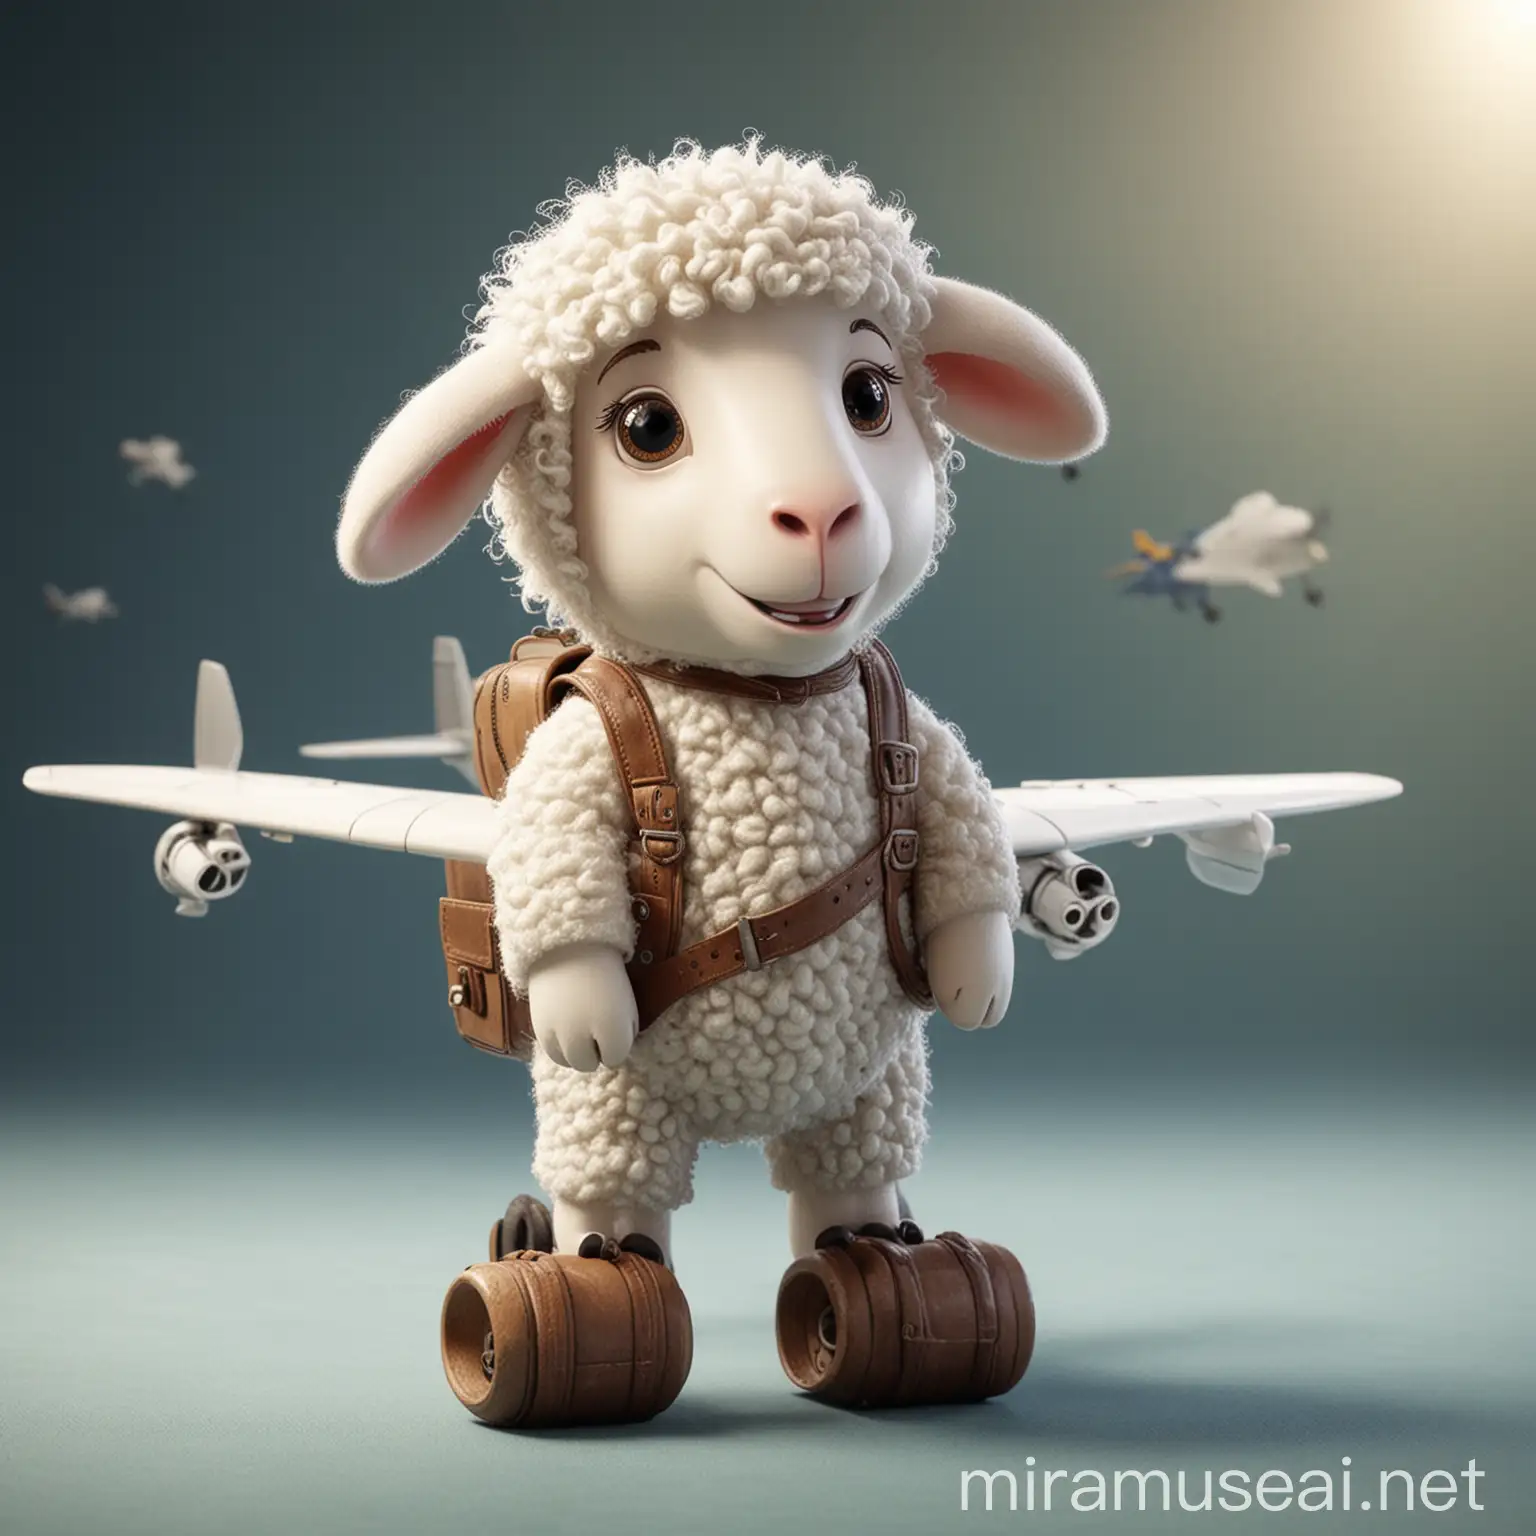 Character of a sheep traveling by plane

